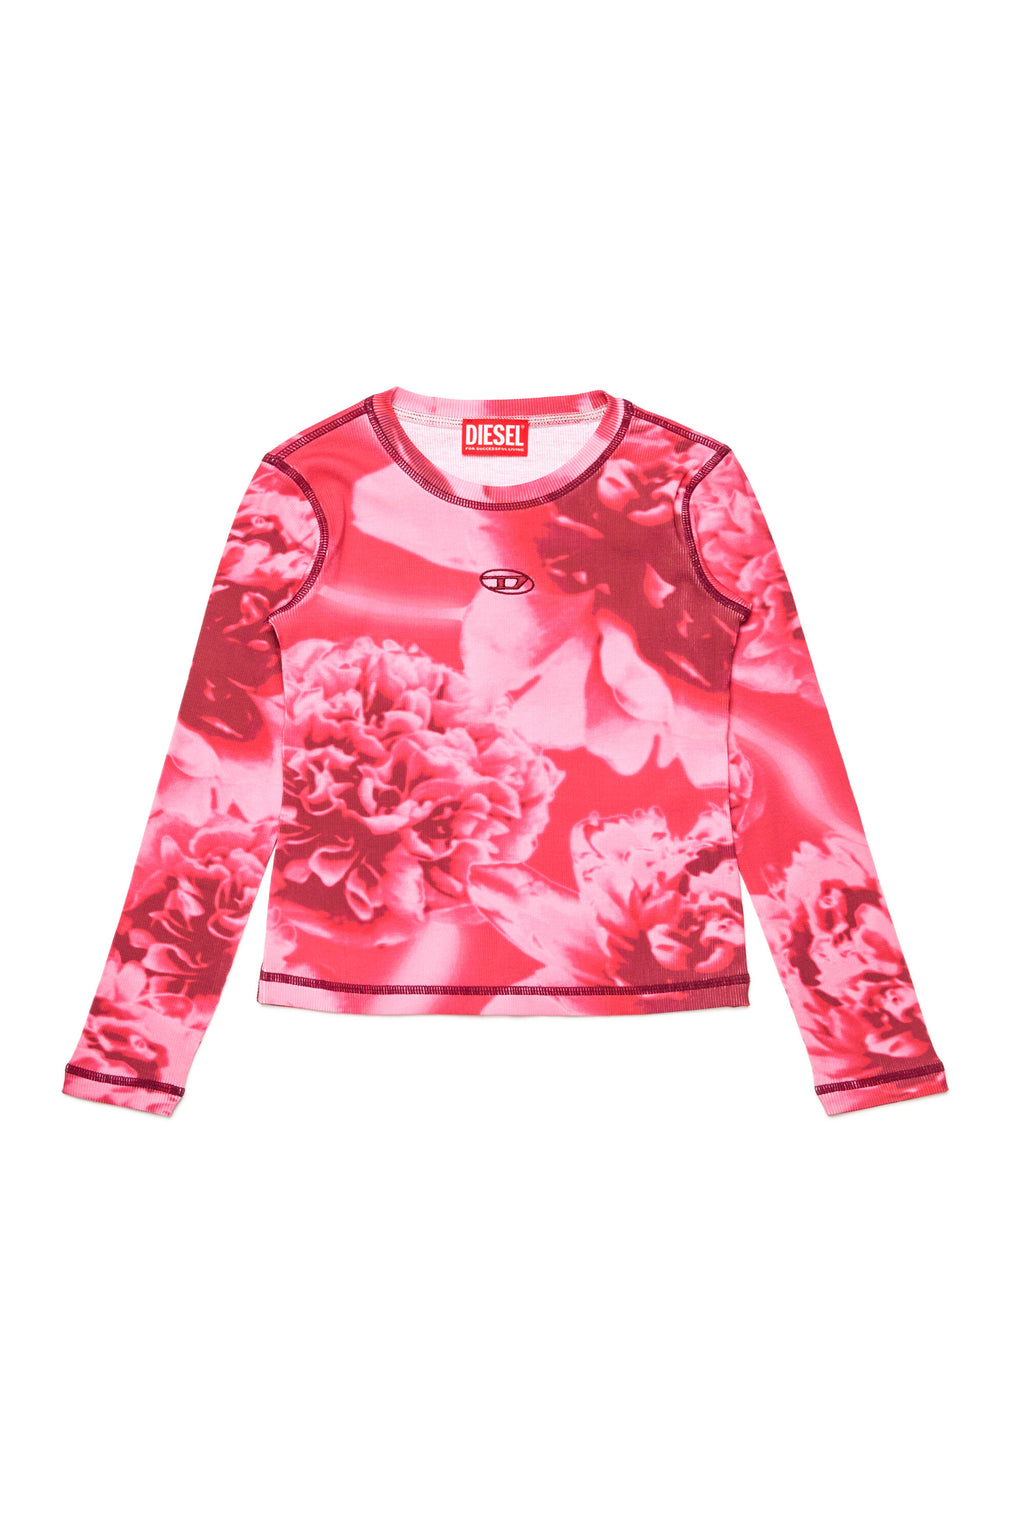 All-over floral long-sleeved T-shirt